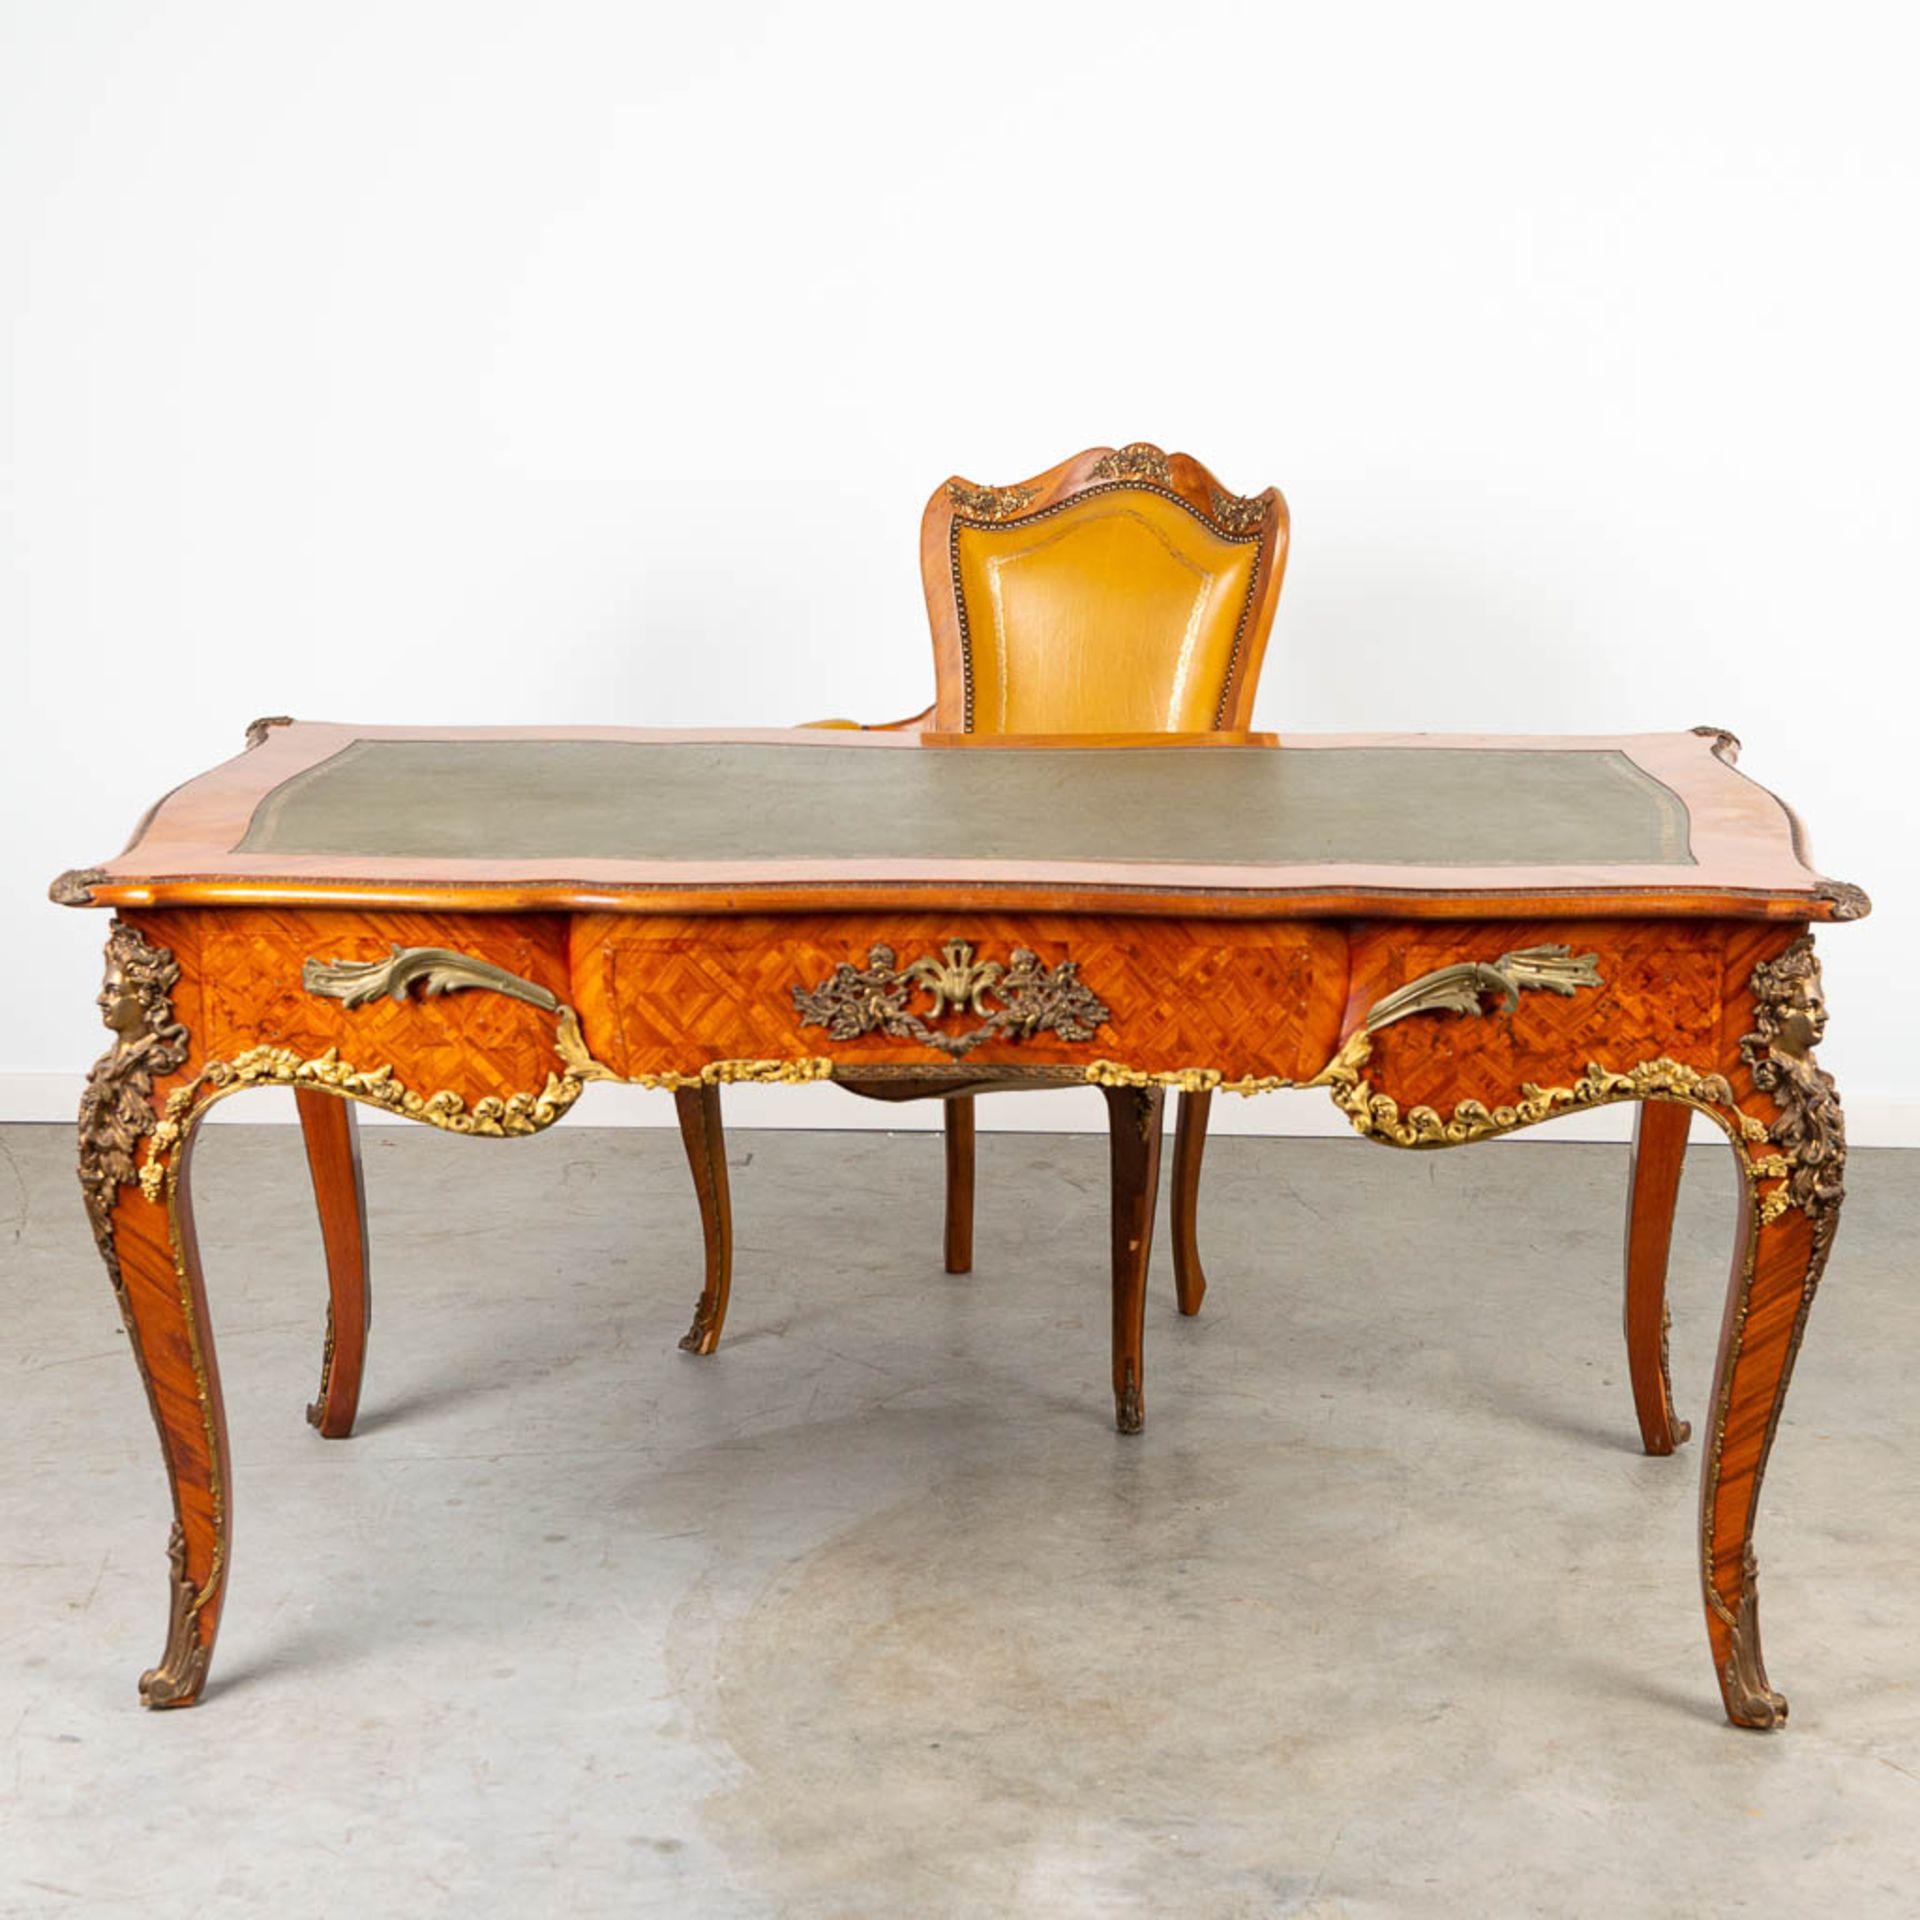 A desk and chair, mounted with bronze in Louis XV style and finished with marquetry bronze and leath